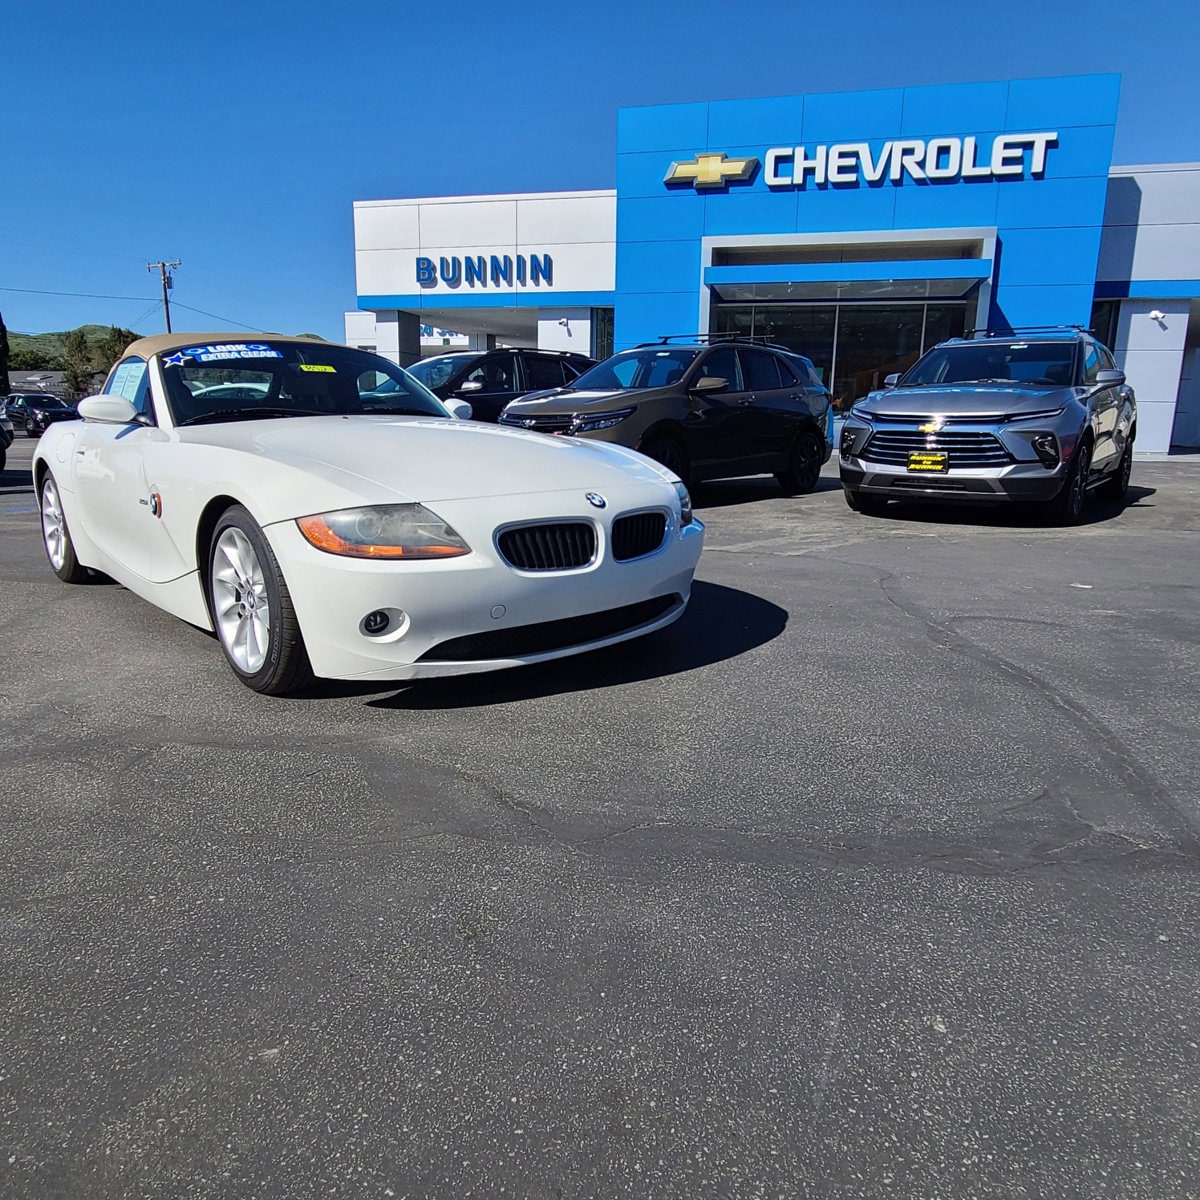 Used 2003 BMW Z4 2.5 with VIN 4USBT33413LS47752 for sale in Fillmore, CA